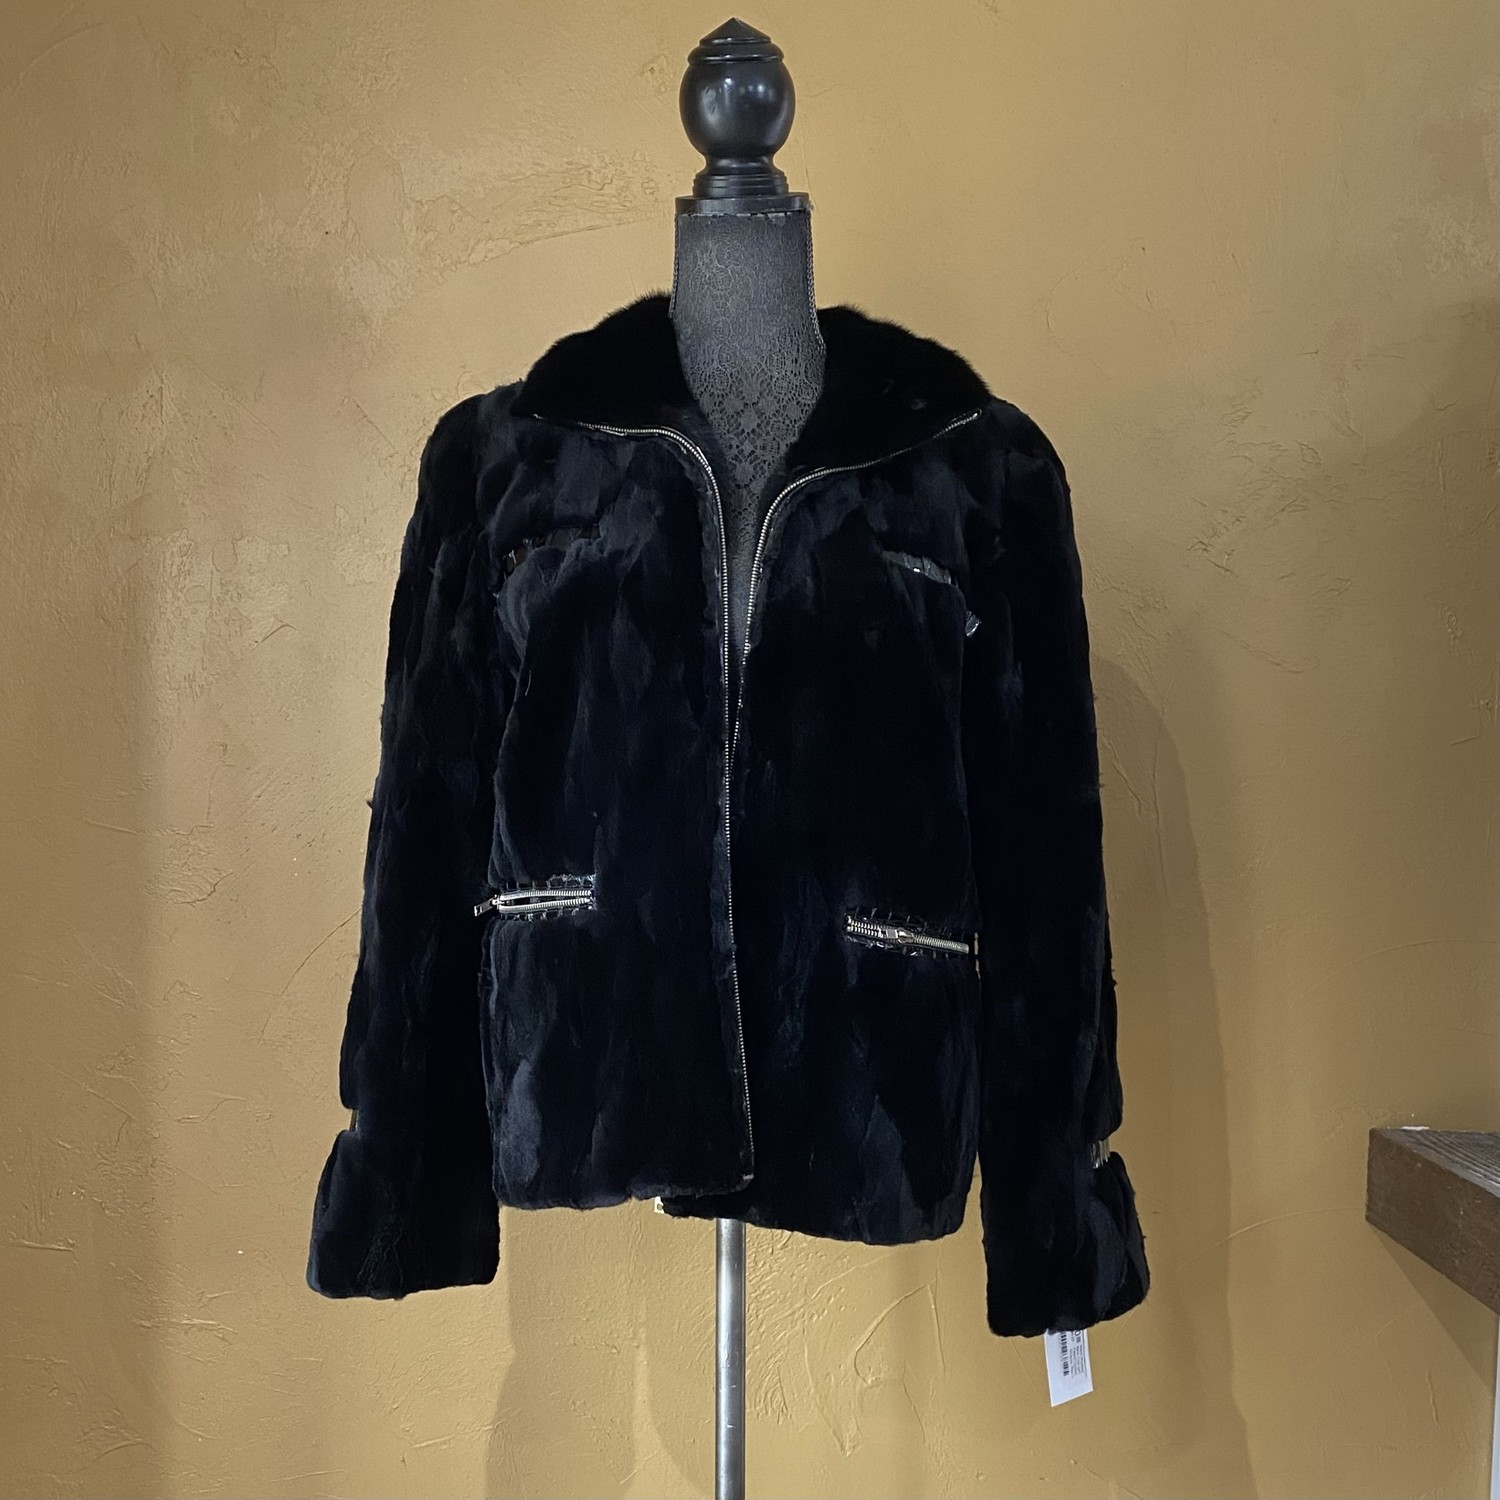 Black Sheared Mink Coat with Patent Leather Accents, Size L - Elements ...